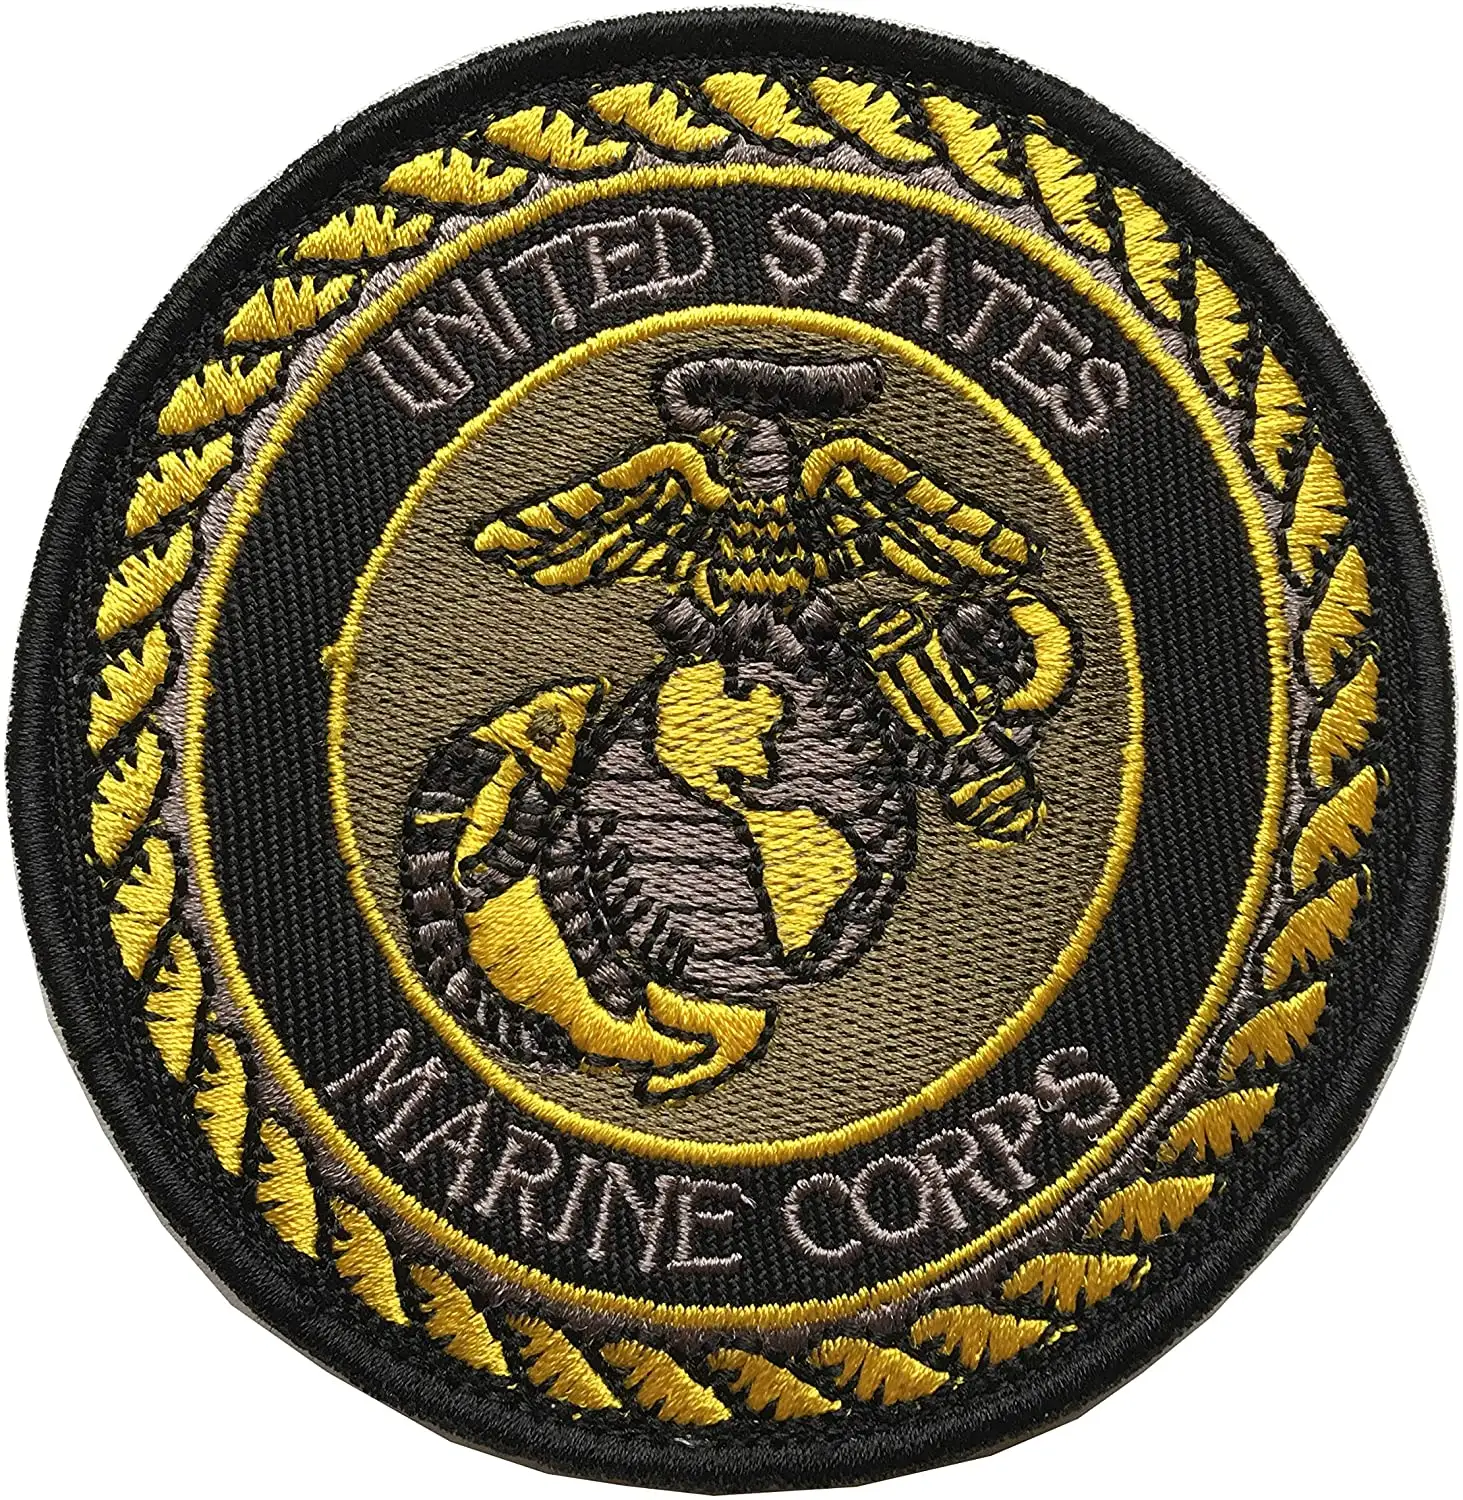 US Navy Marine Corps Dell'esercito/<span class=keywords><strong>USMC</strong></span>/Fare Tattico Militare Hook & Loop di Patch